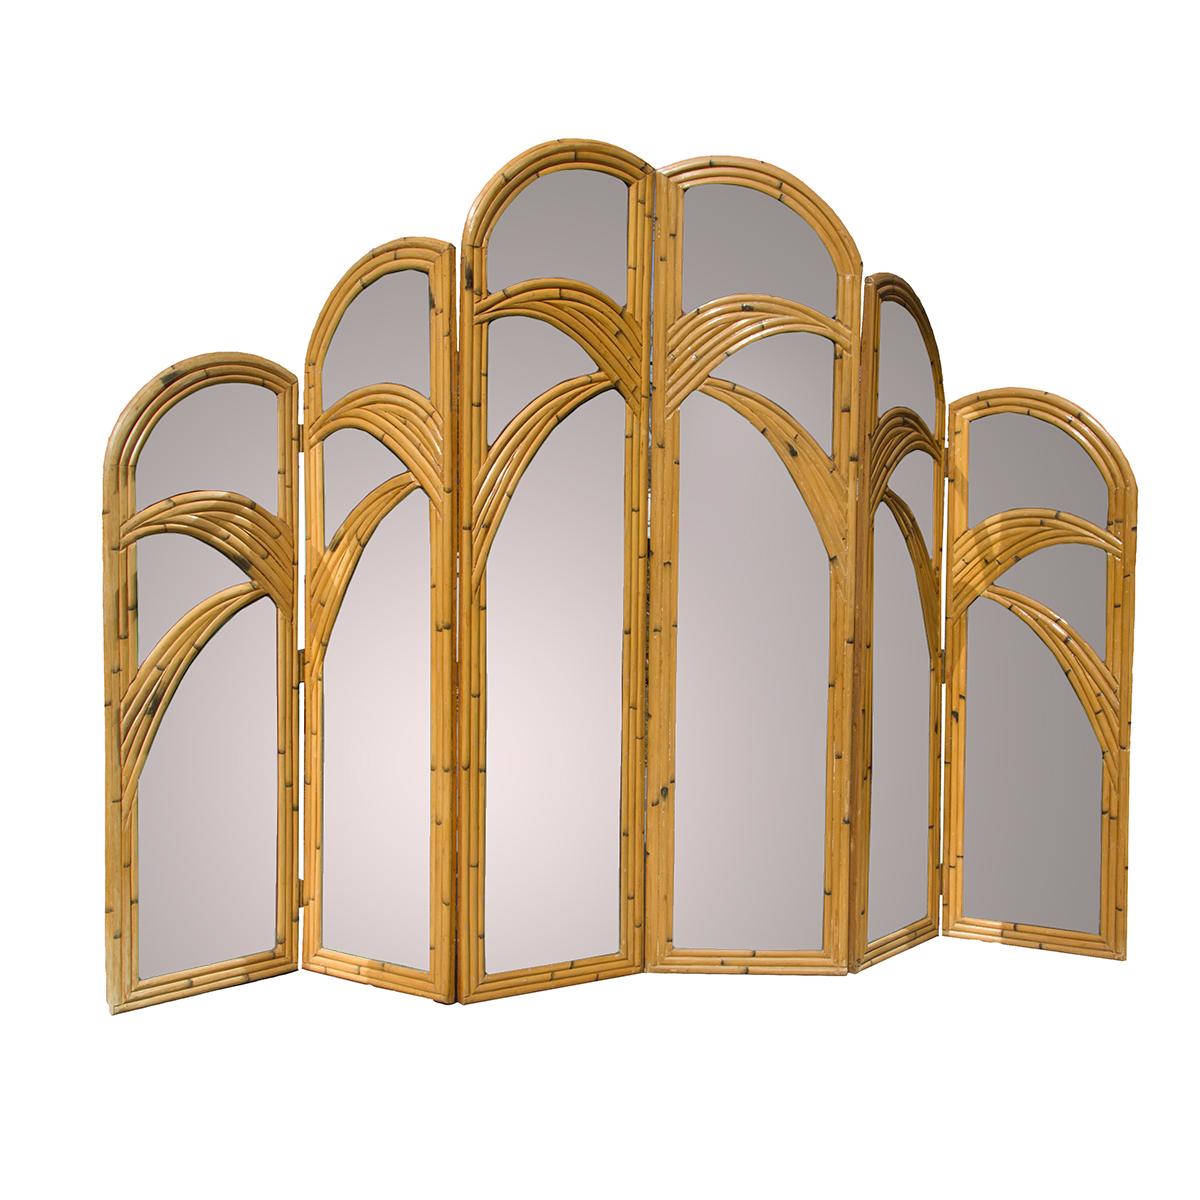 Pair of three panel rattan mirrored screens
Six panels total for the pair
Each panel is 18